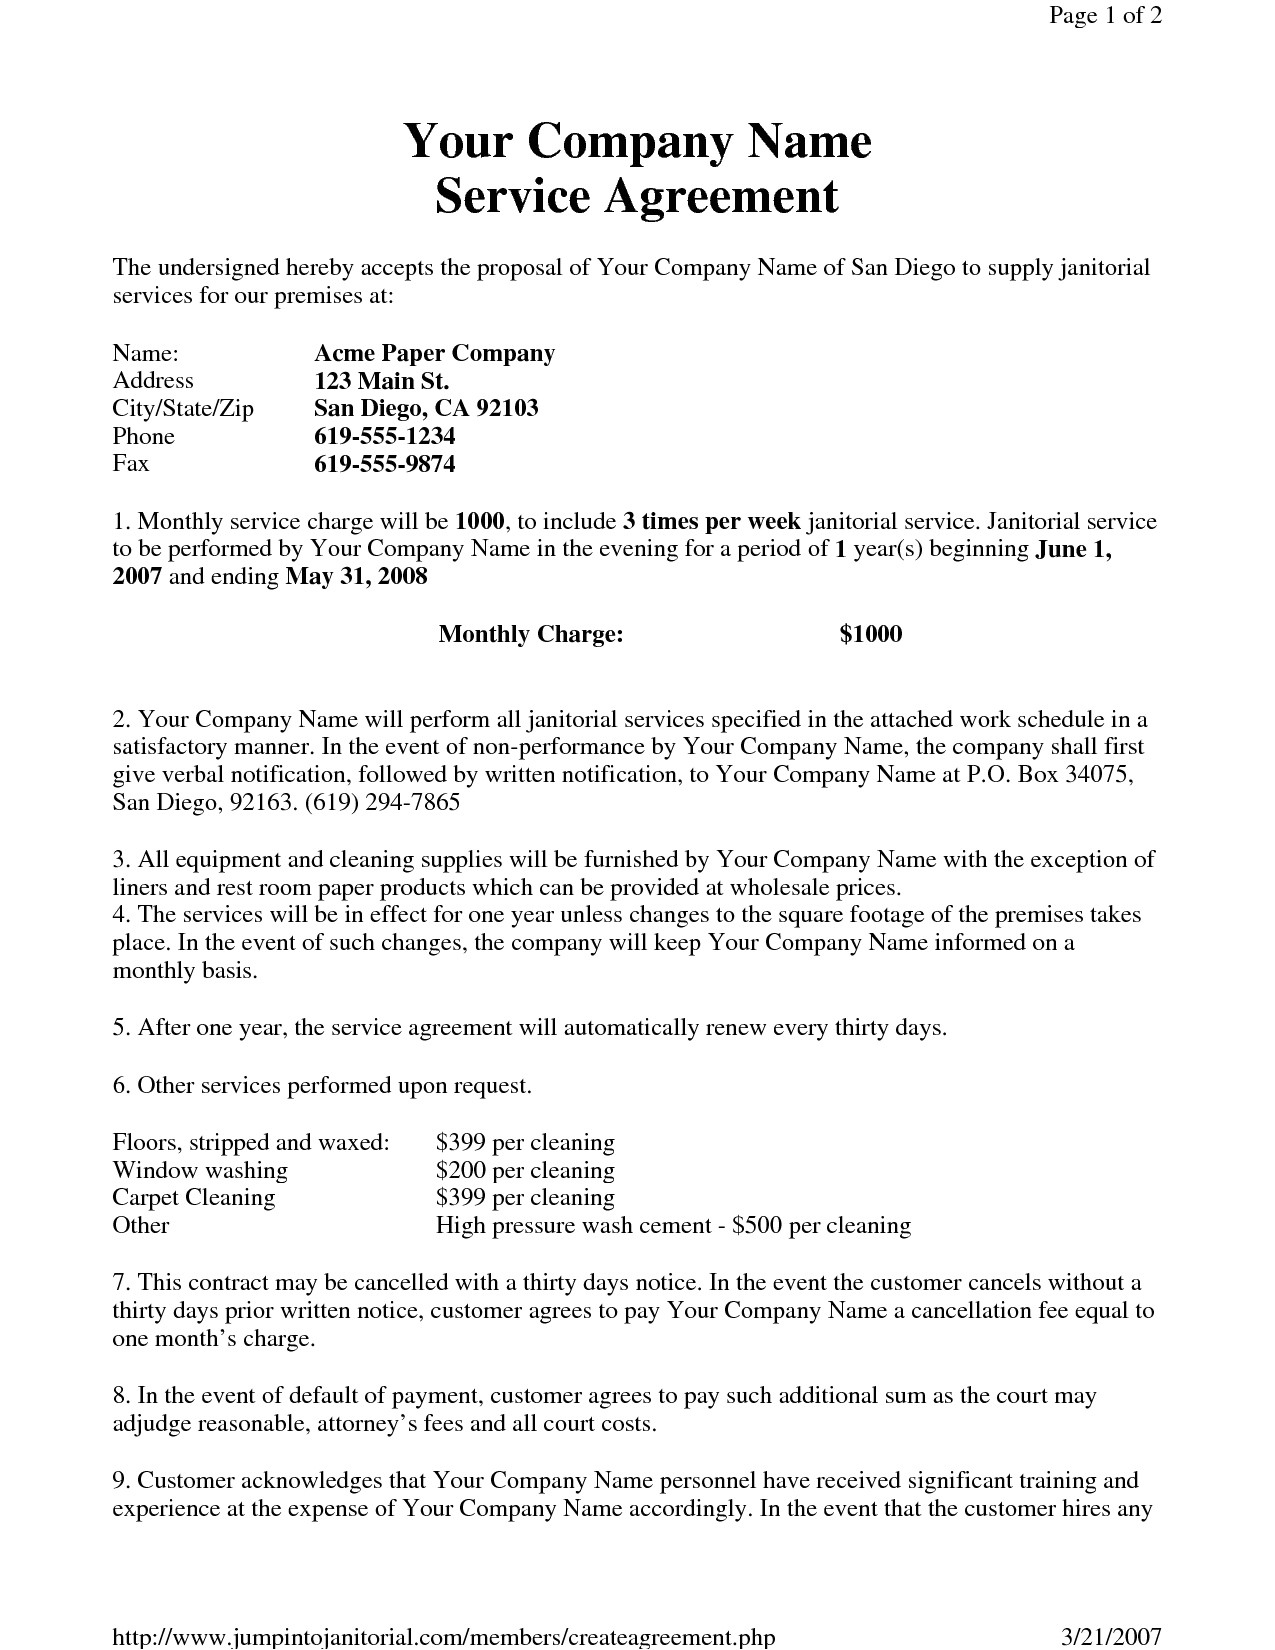 virtual assistant contract fresh janitorial service agreement